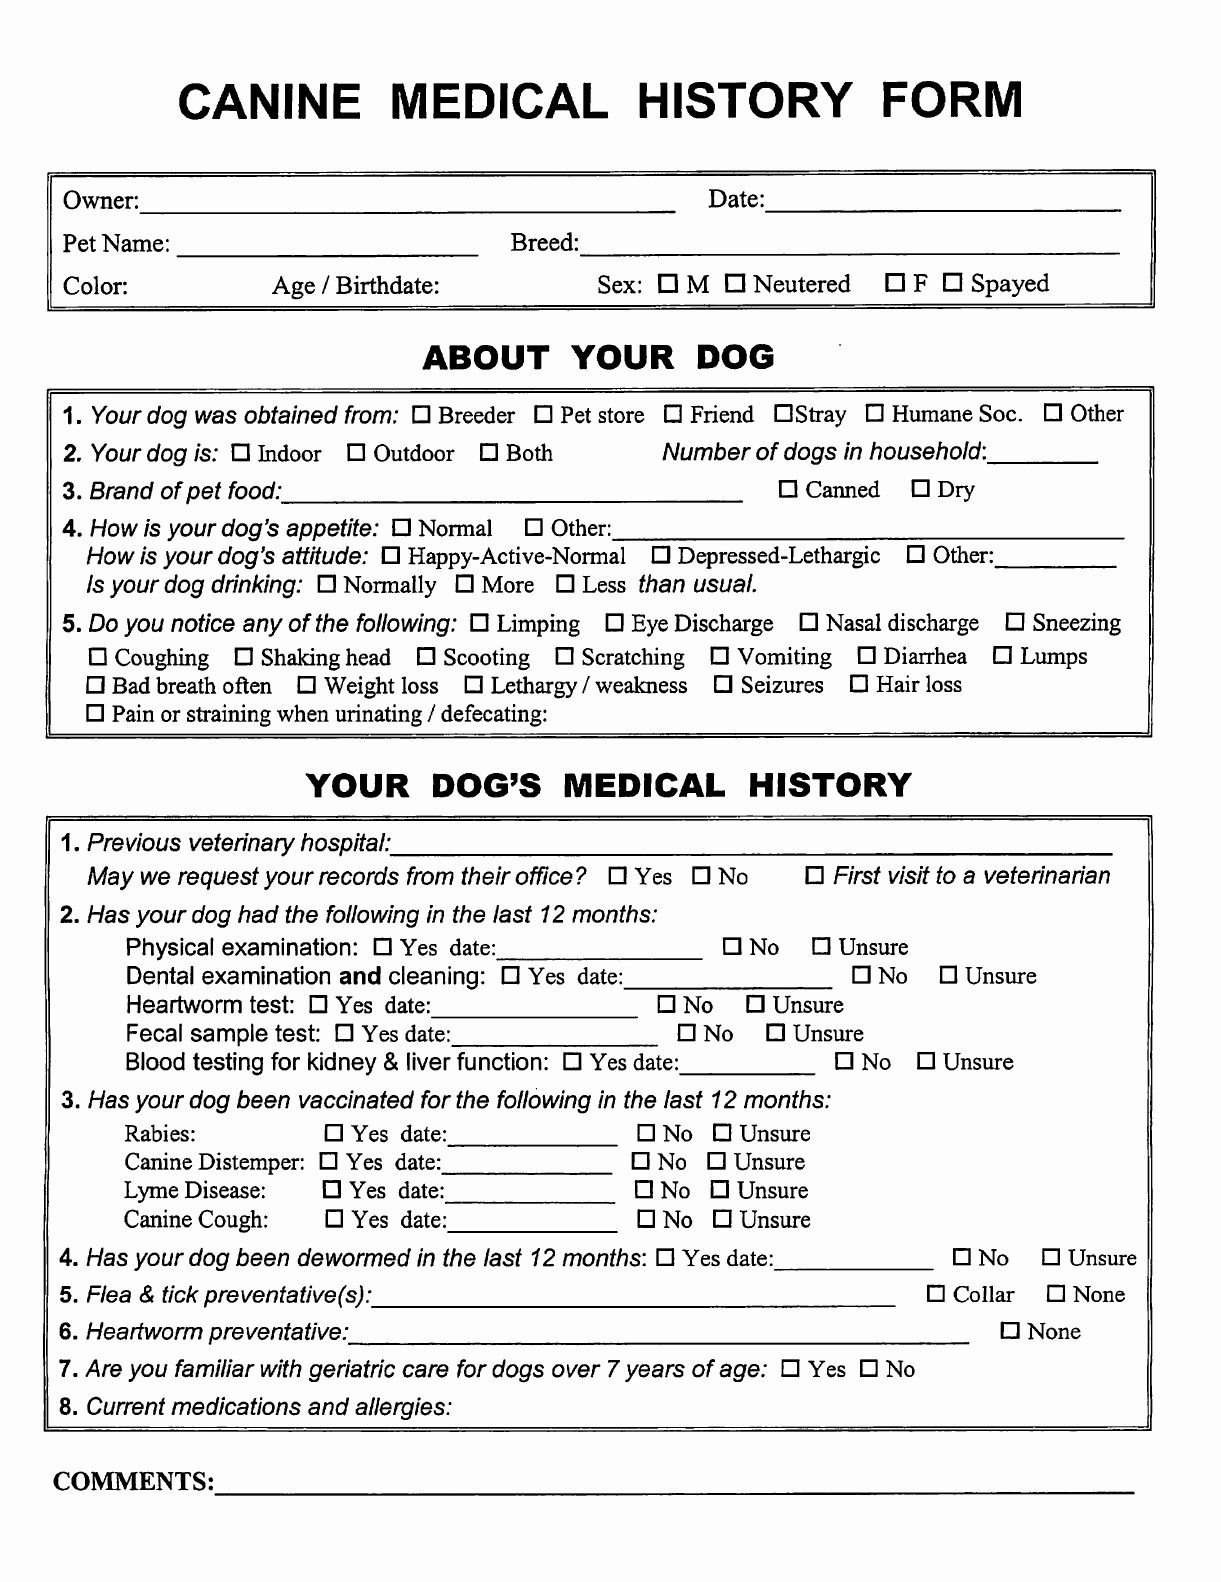 Veterinary Medical Records Templates New Download Canine Medical History form for Free formtemplate